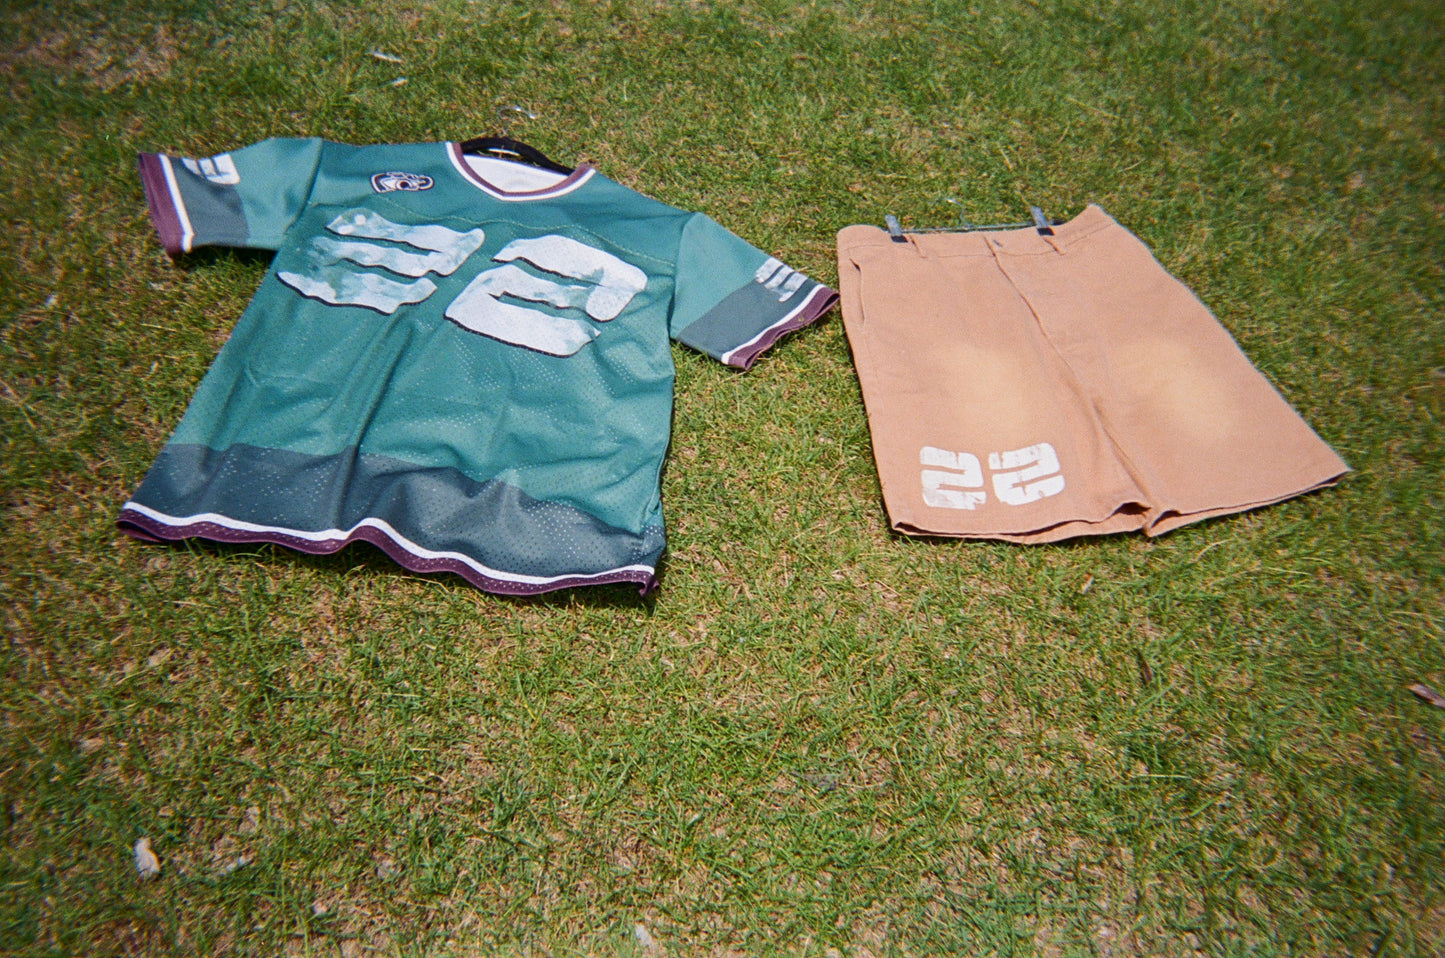 The Vision Jersey